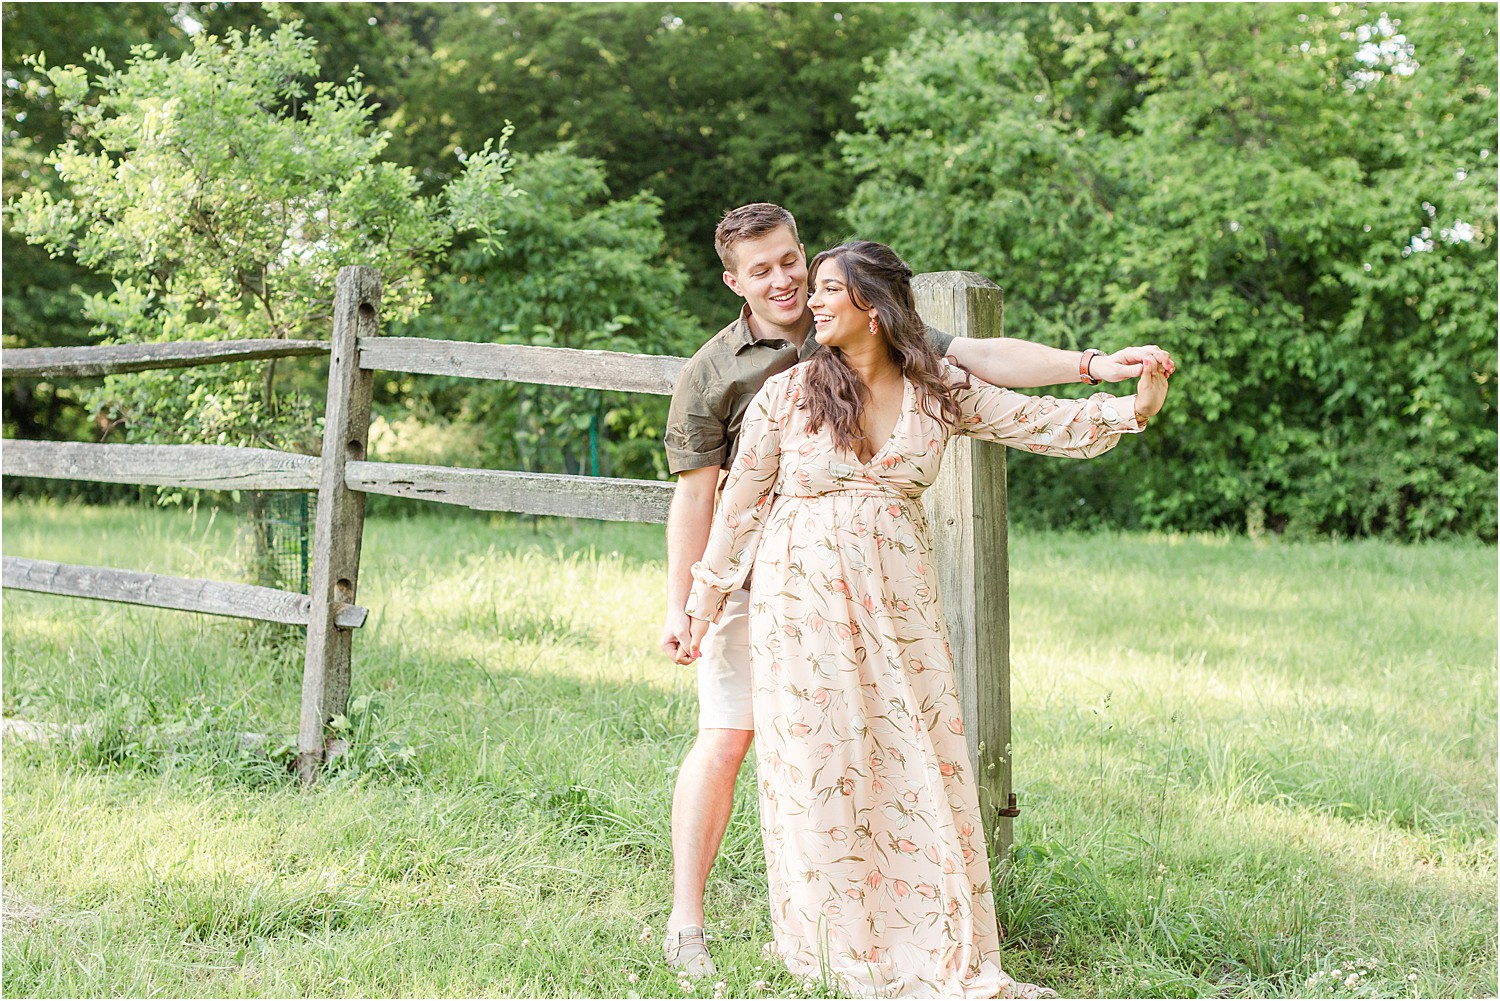 candid photo of couple dancing by fence post